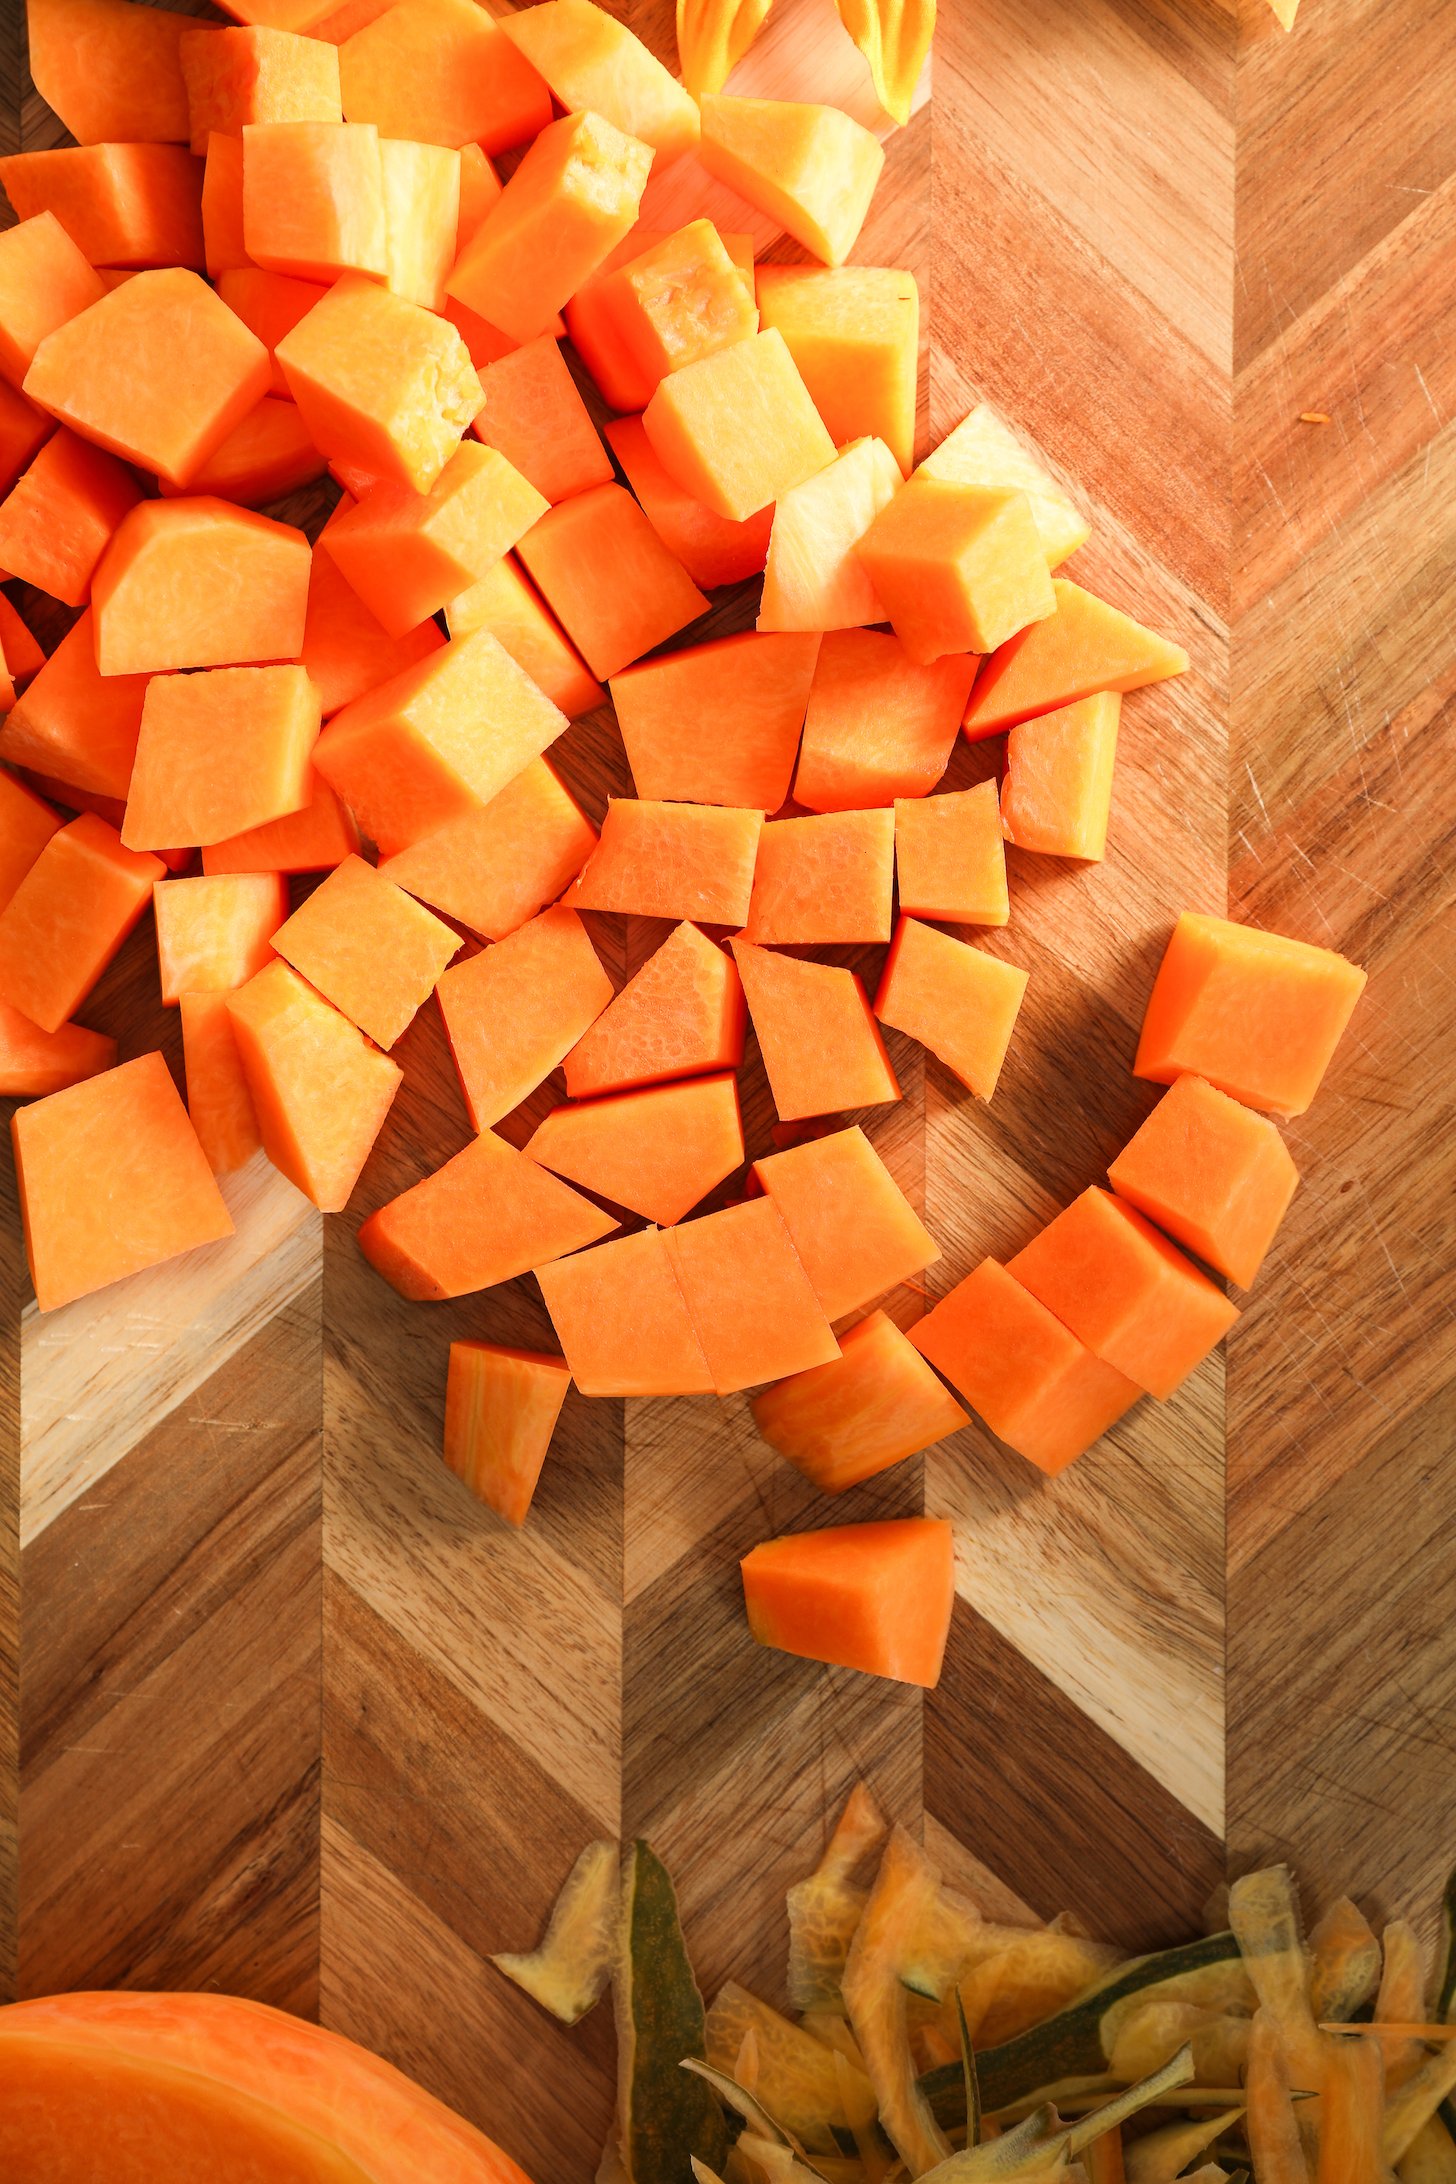 Chopped pumpkin pieces spread out on a wooden board.